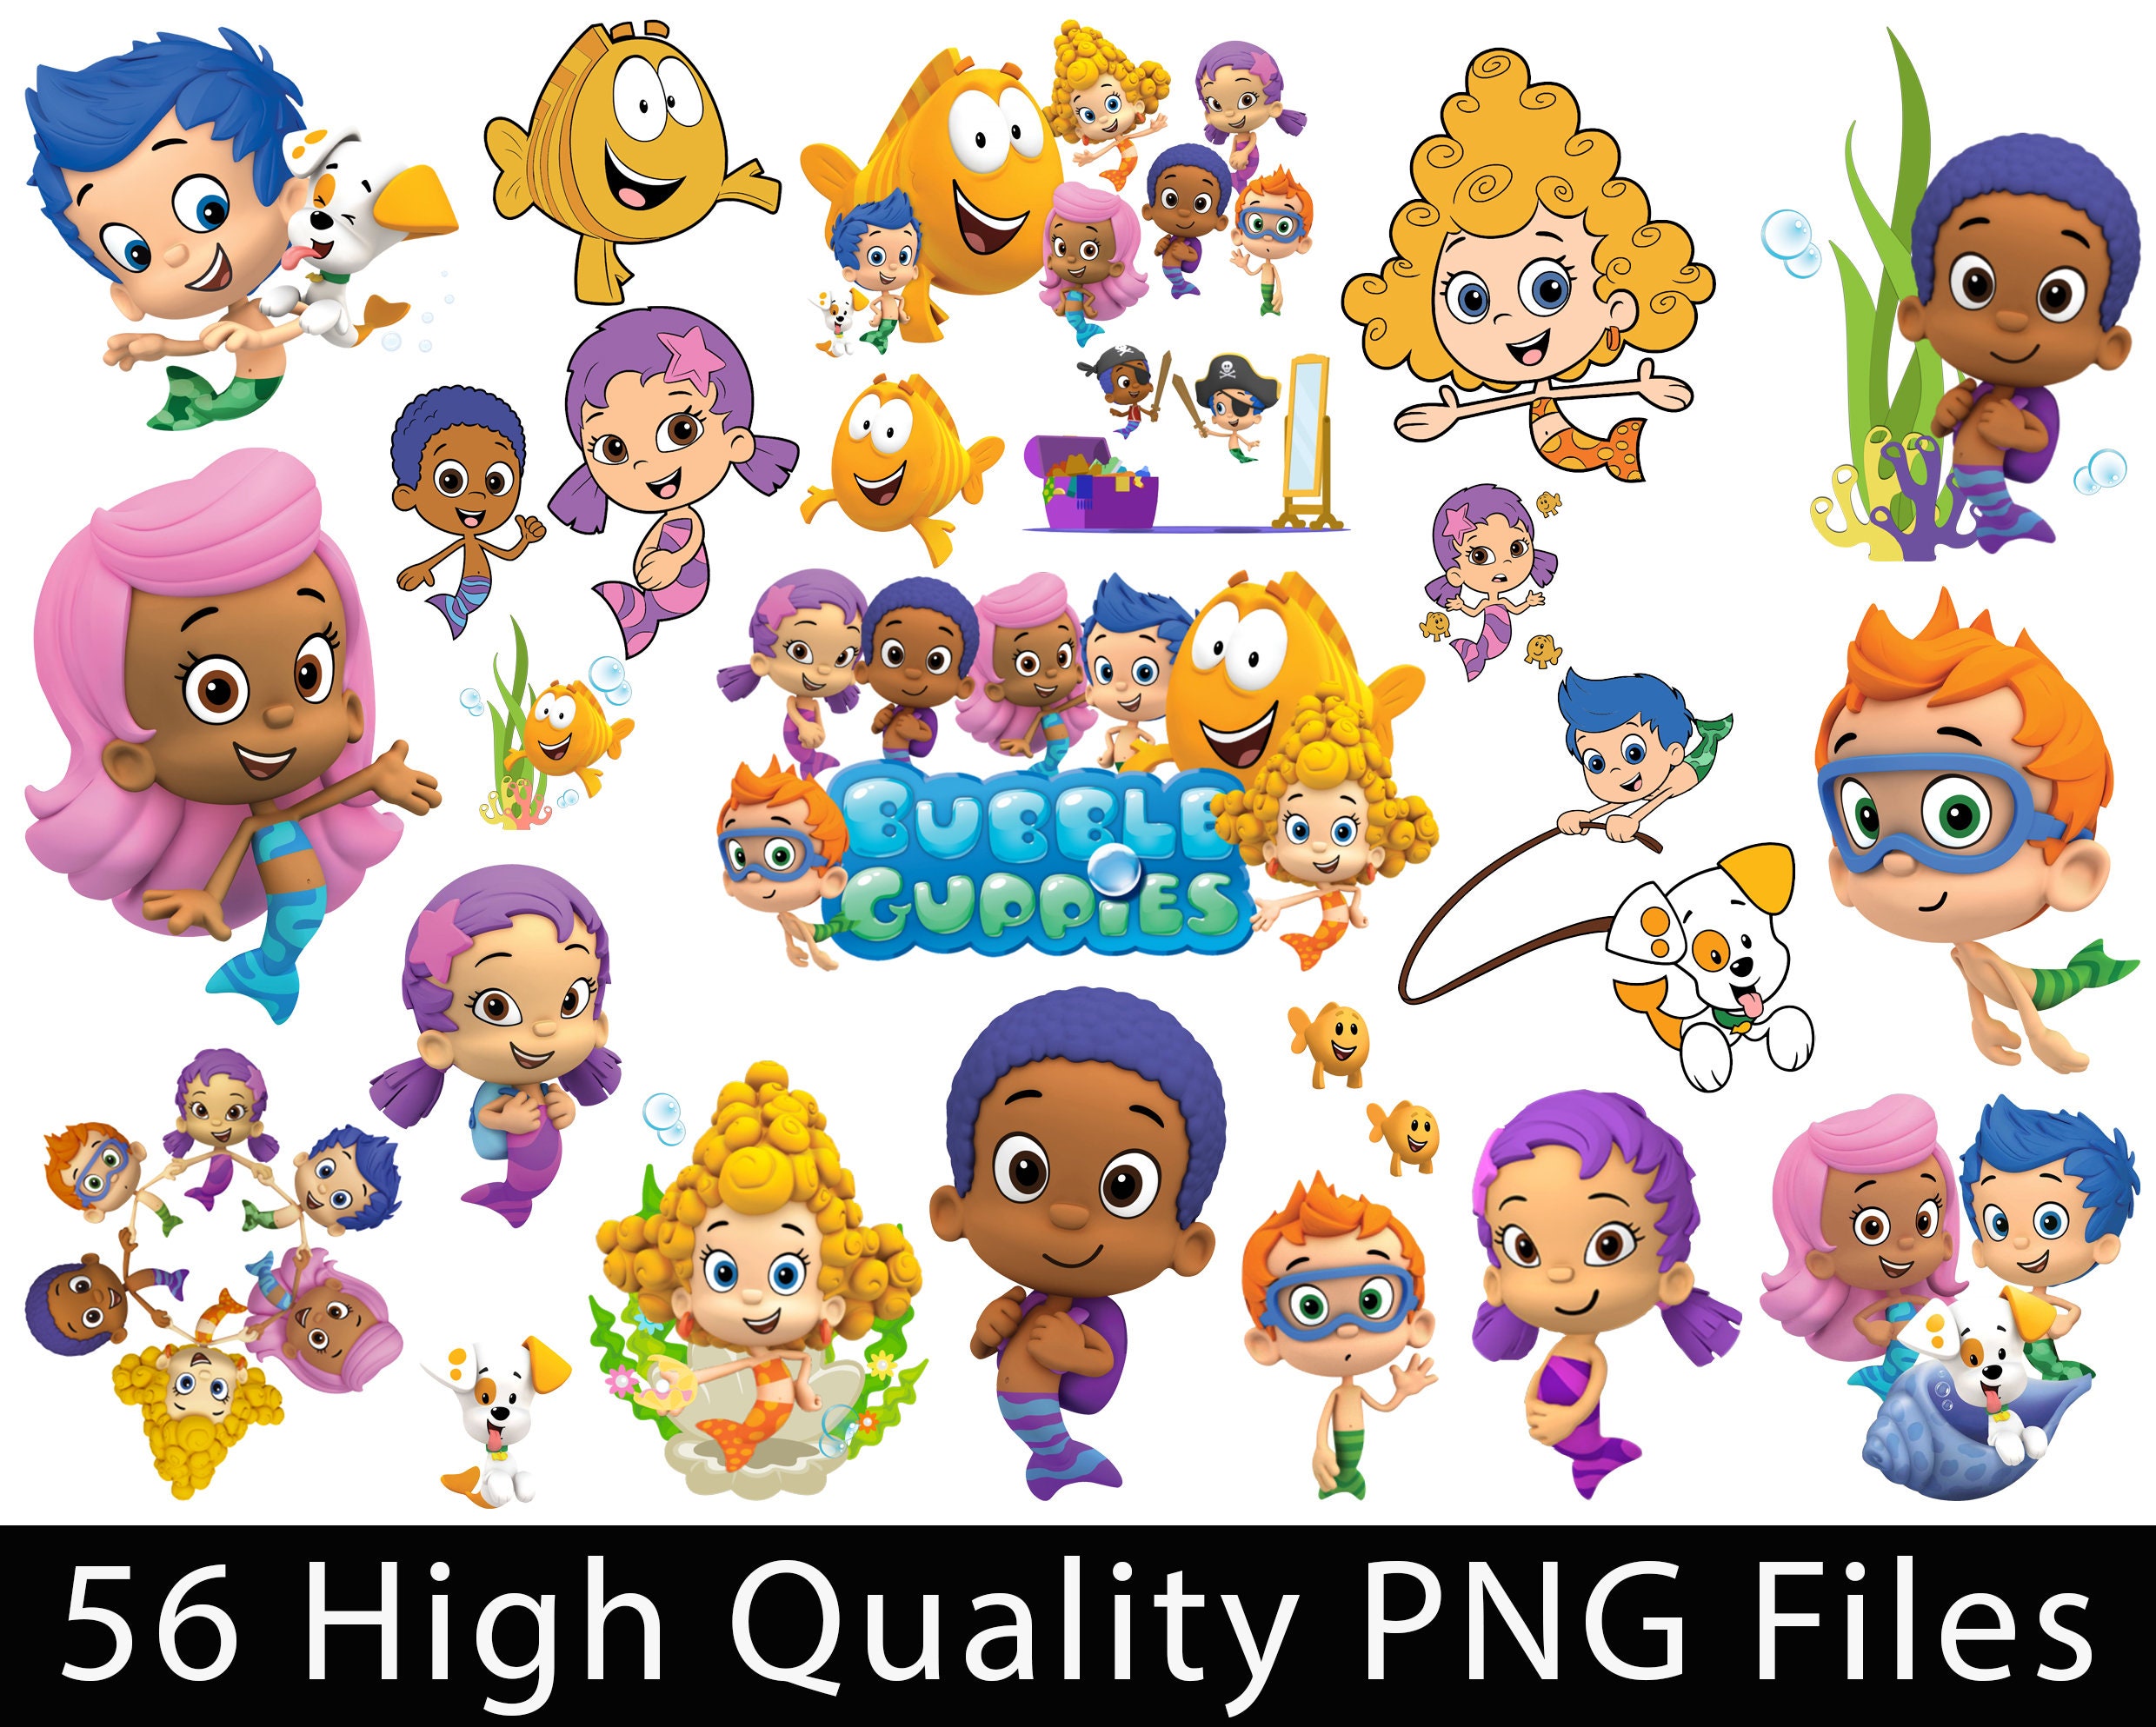 Bubble Guppies Nail Art Stickers - wide 4